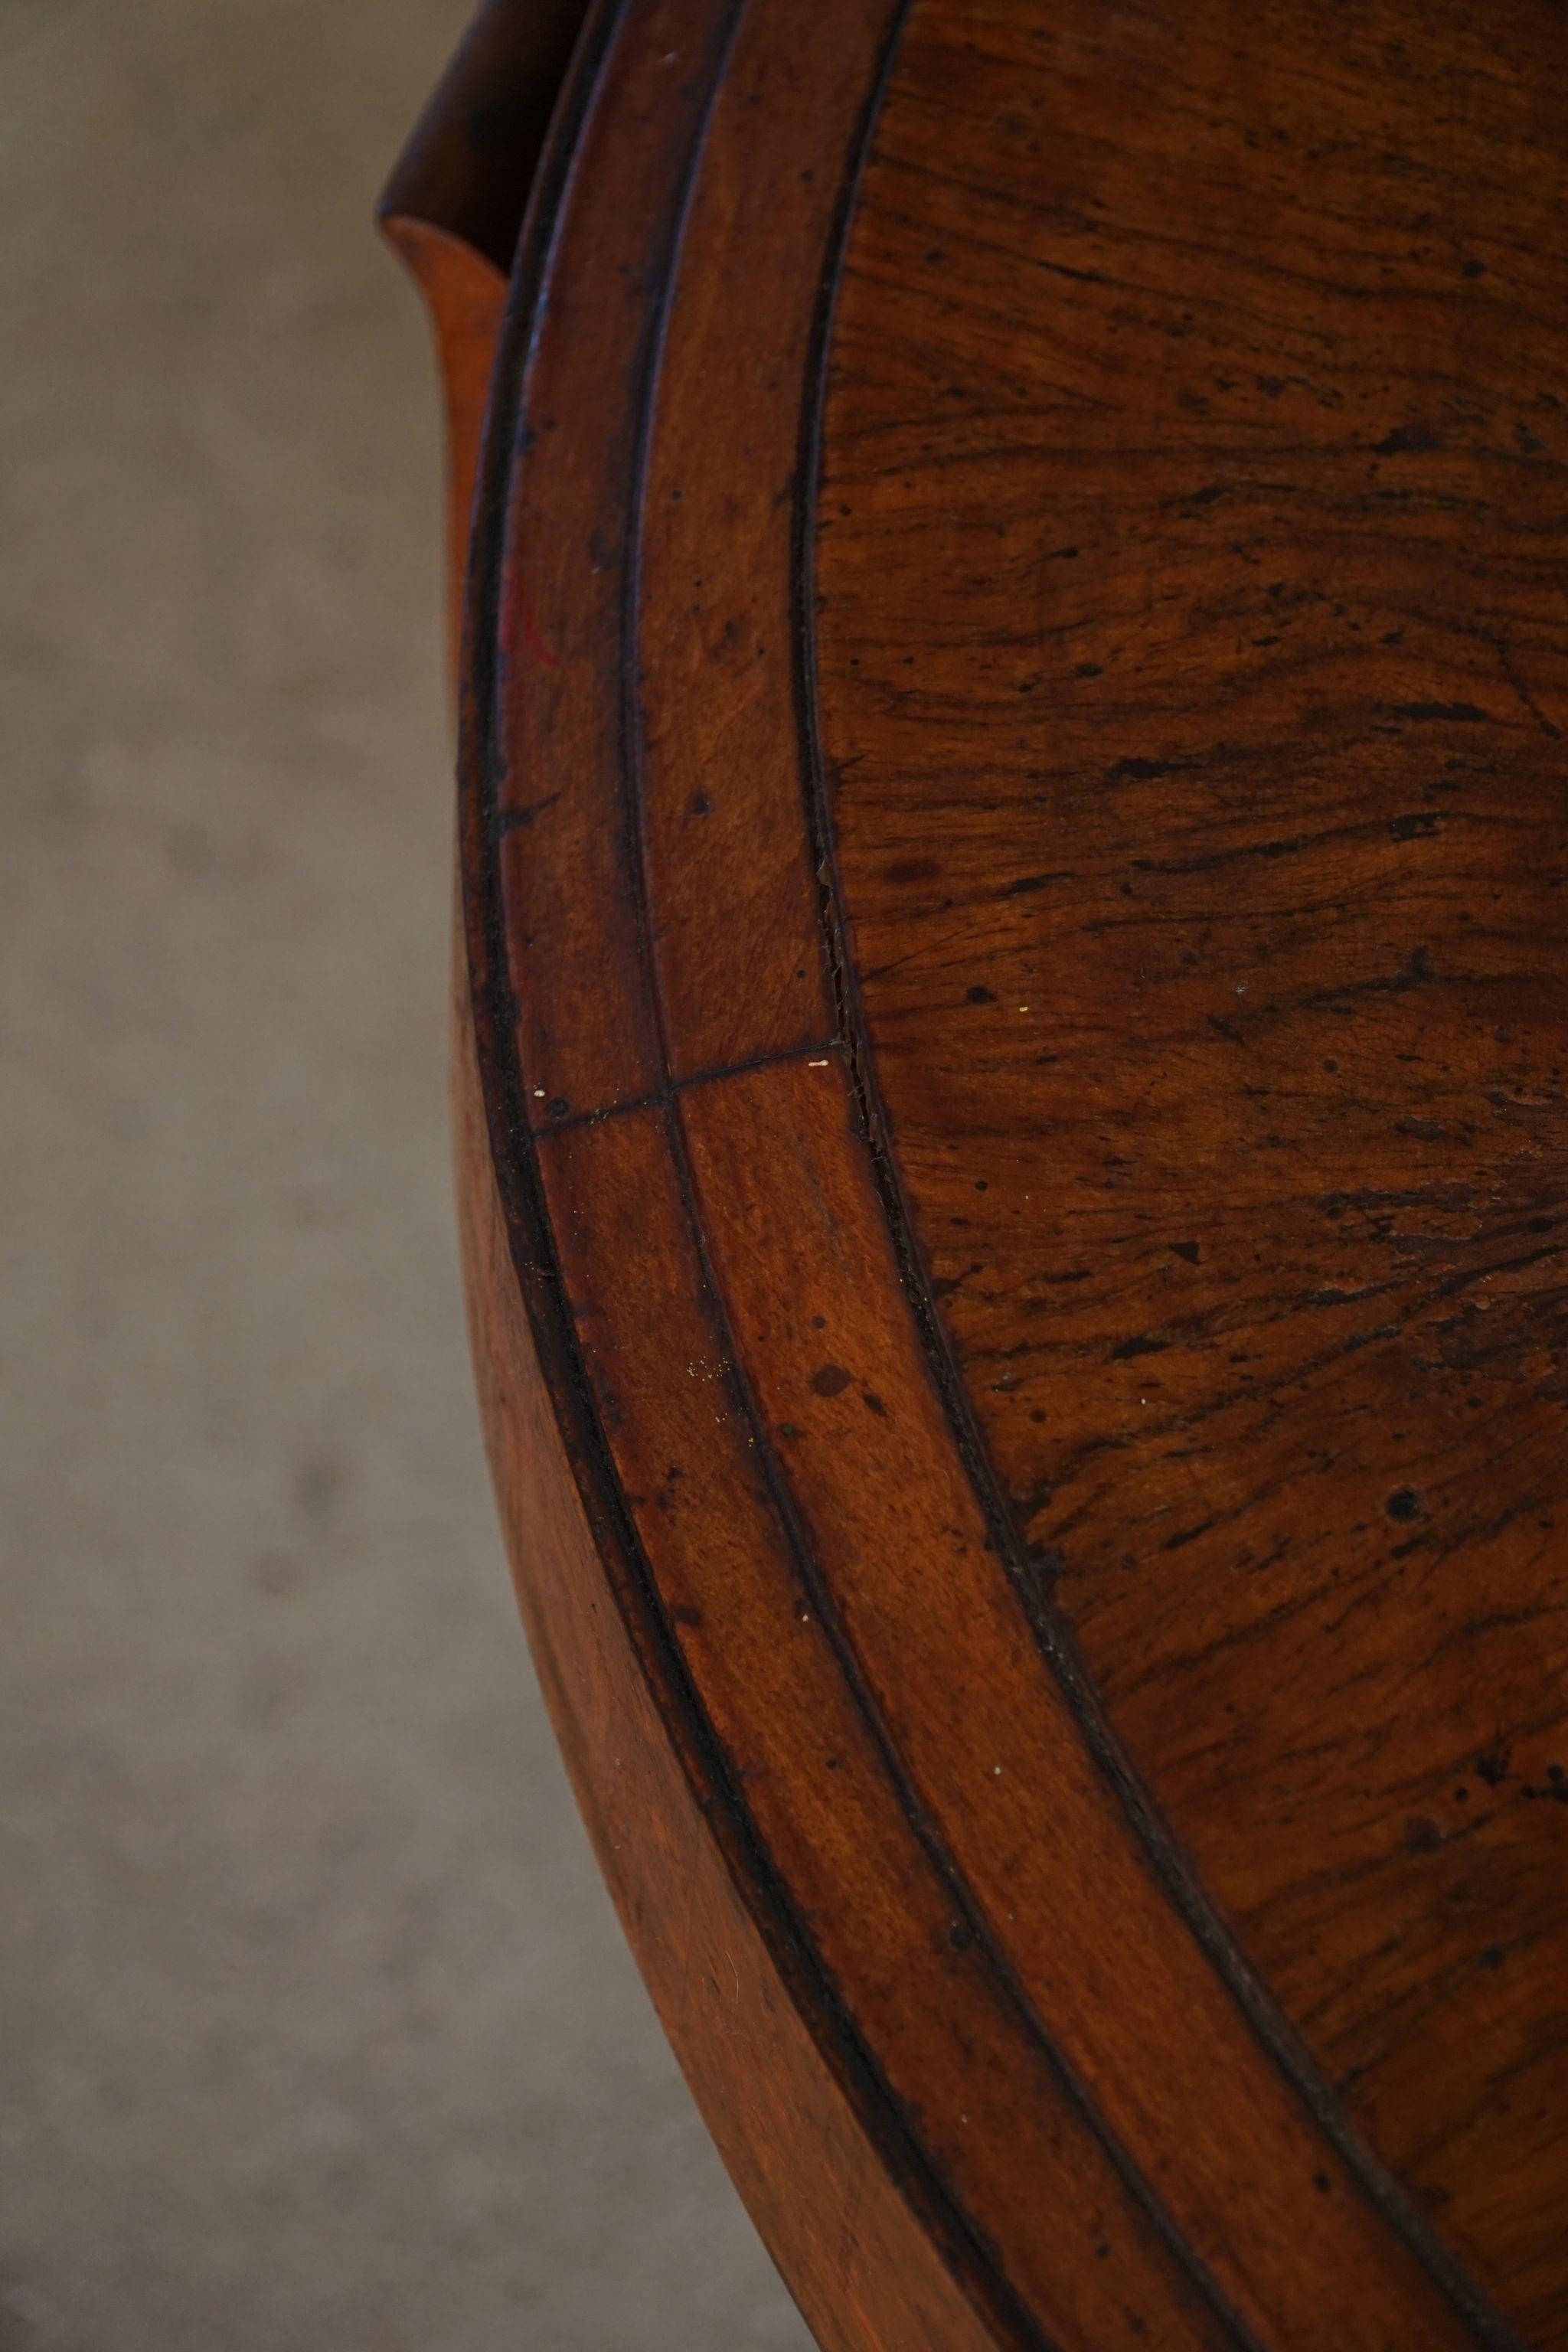 Art Deco, Large Round Sofa Table in Walnut, By a Danish Cabinetmaker, 1930s For Sale 7